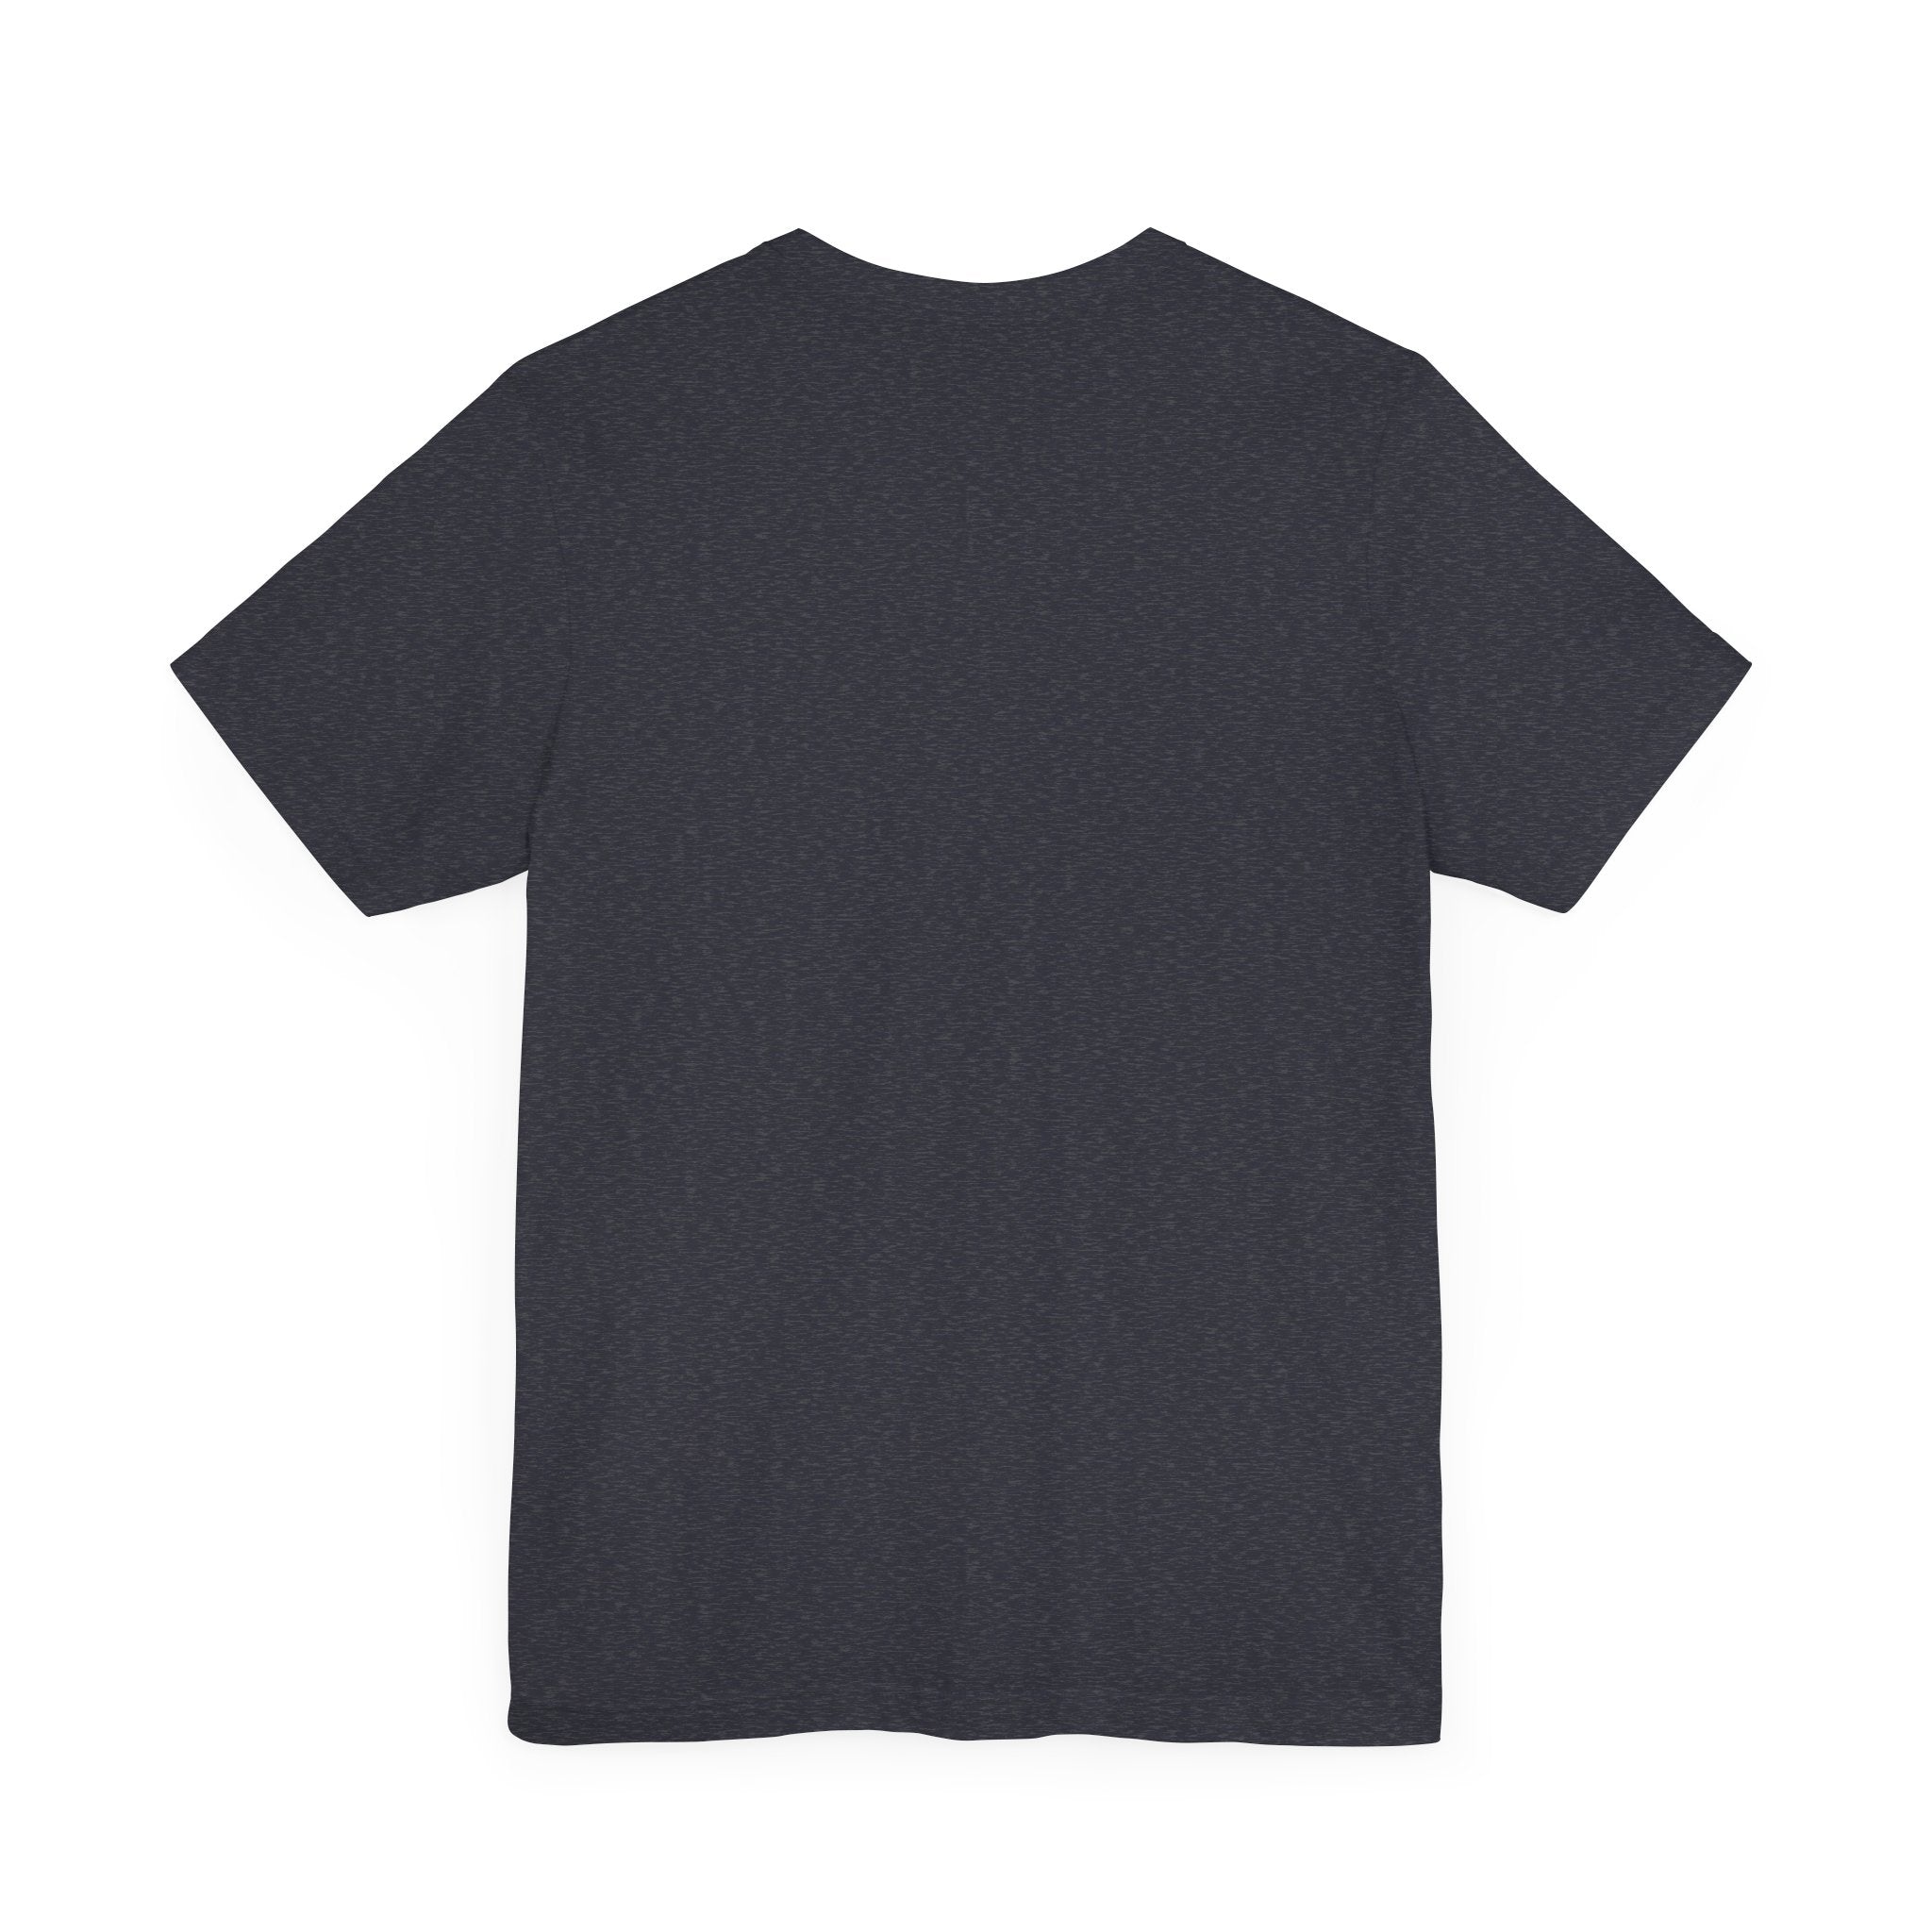 Back view of a plain black short-sleeve Binary Rain Cloud - T-Shirt crafted from Airlume combed and ring-spun cotton, set against a white background.